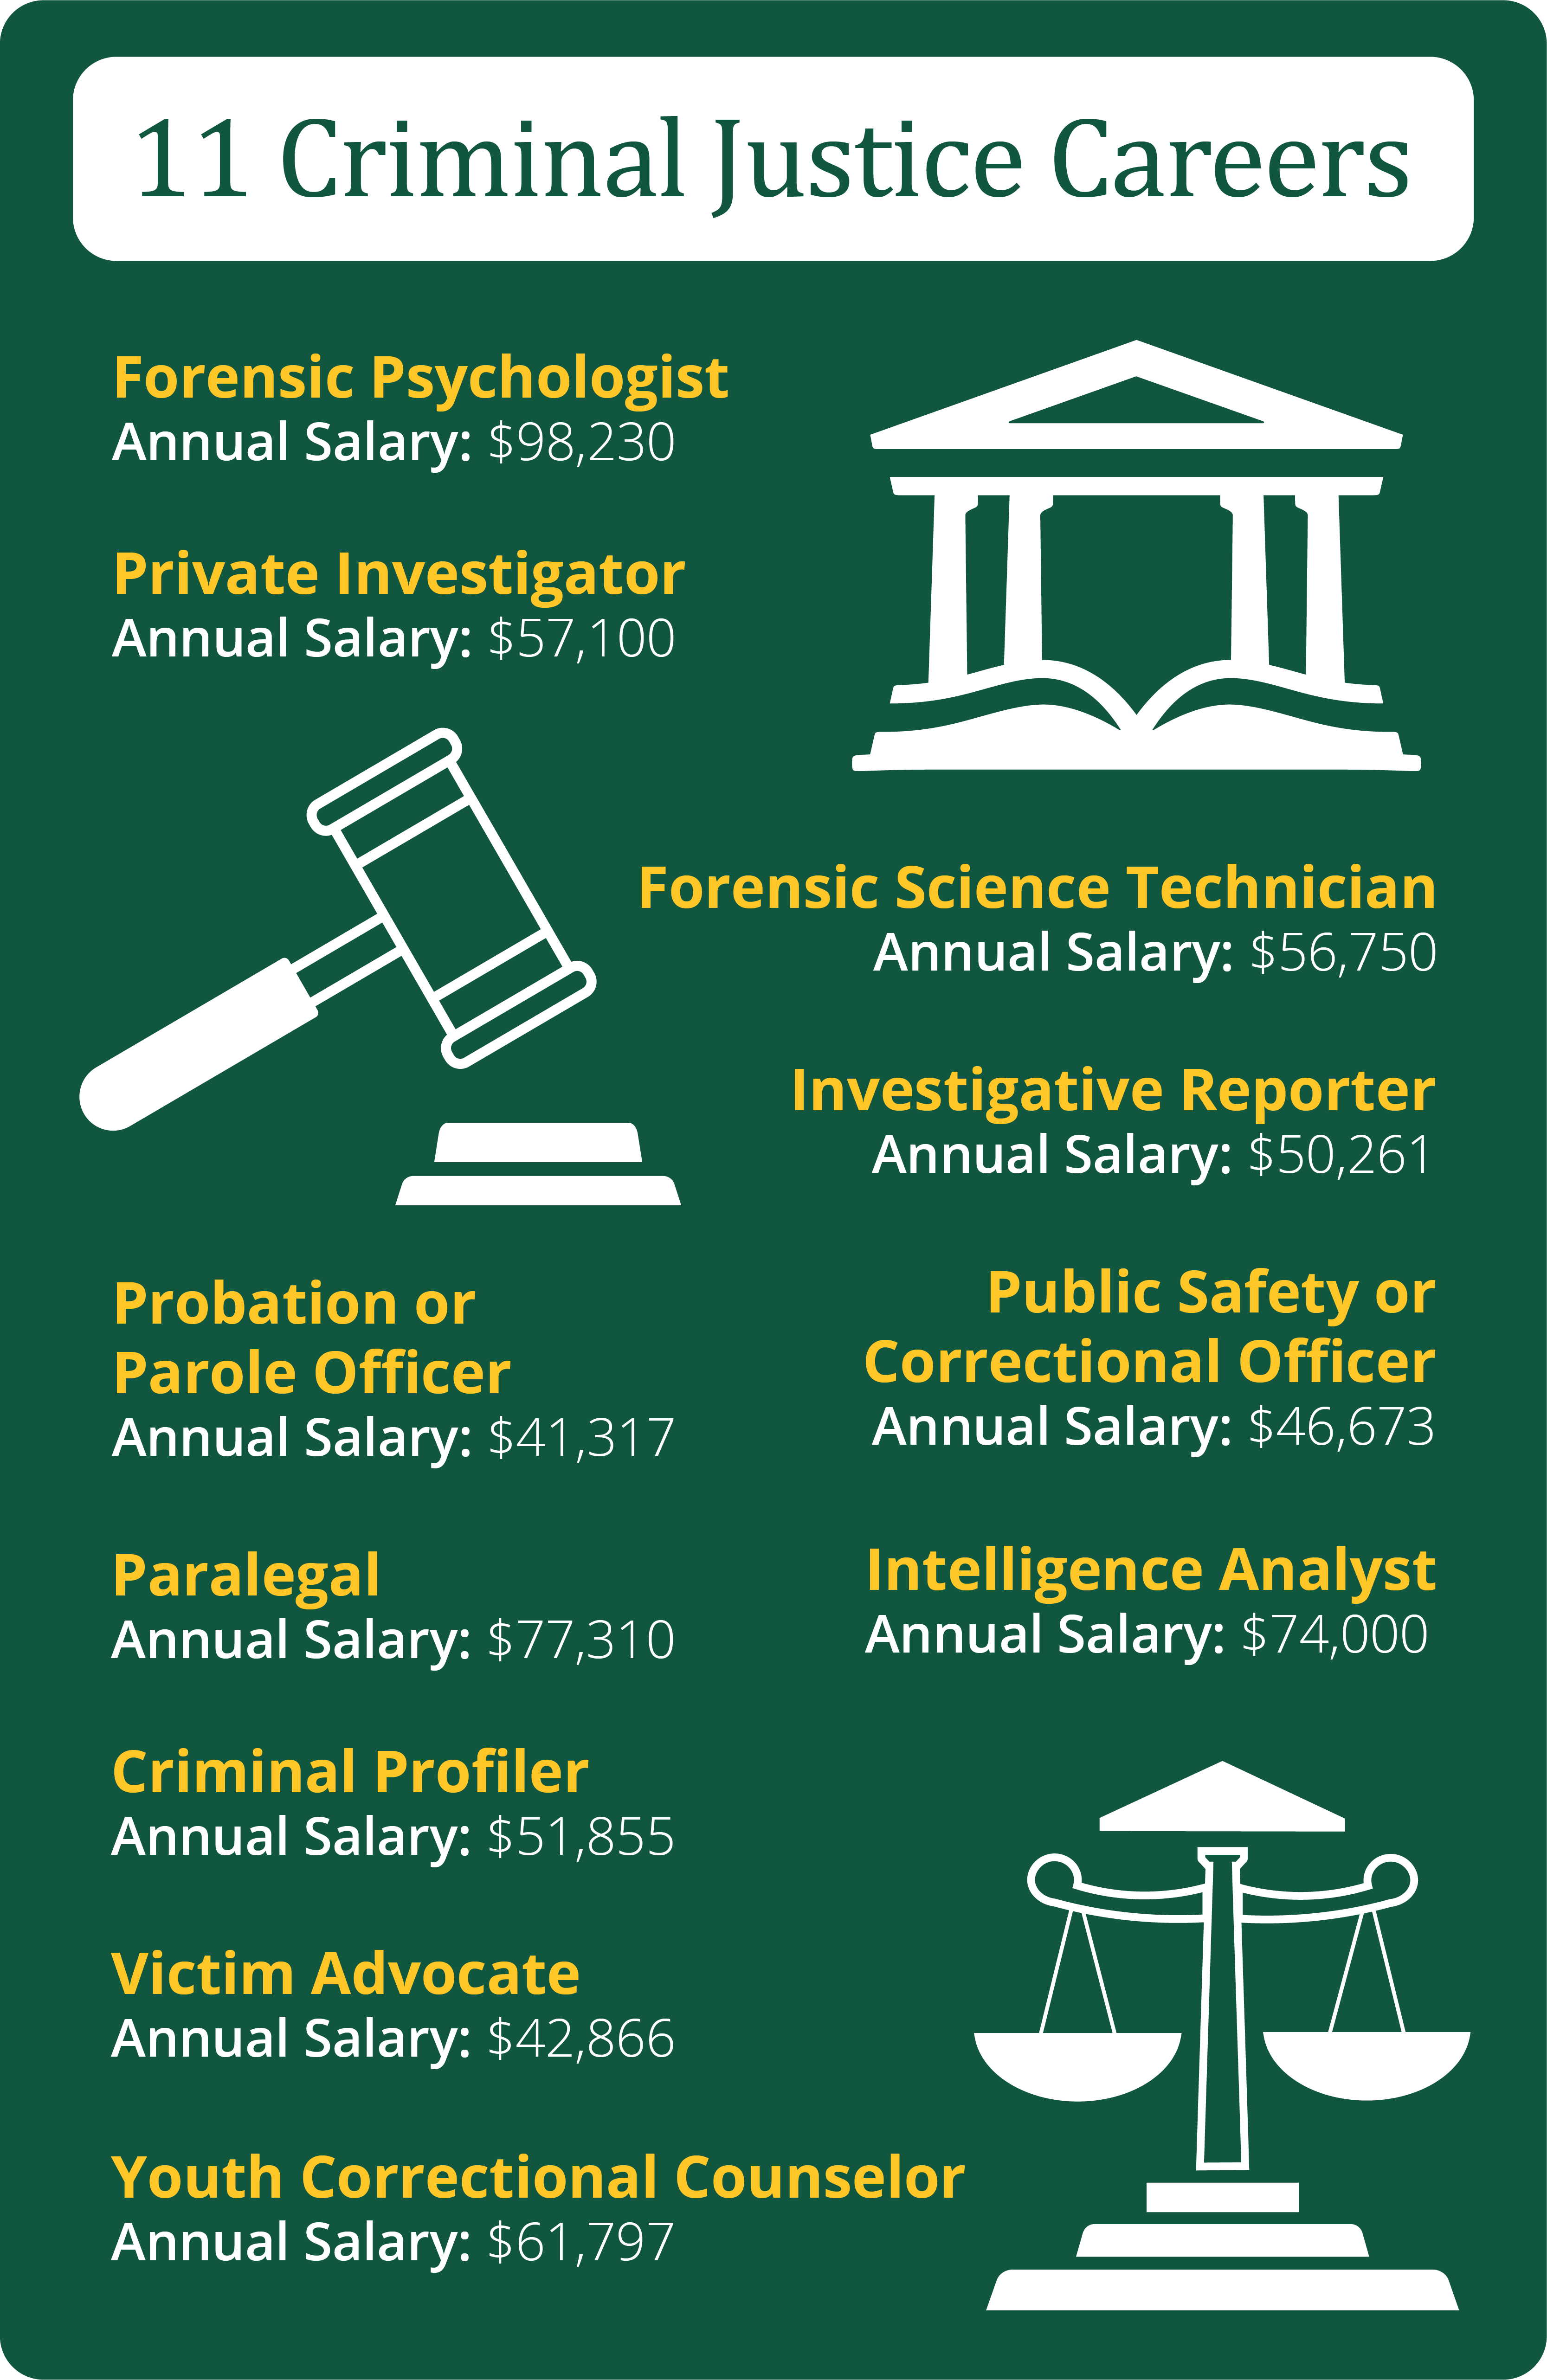 Criminal Justice Jobs: 11 Careers You Can Pursue With a Criminal